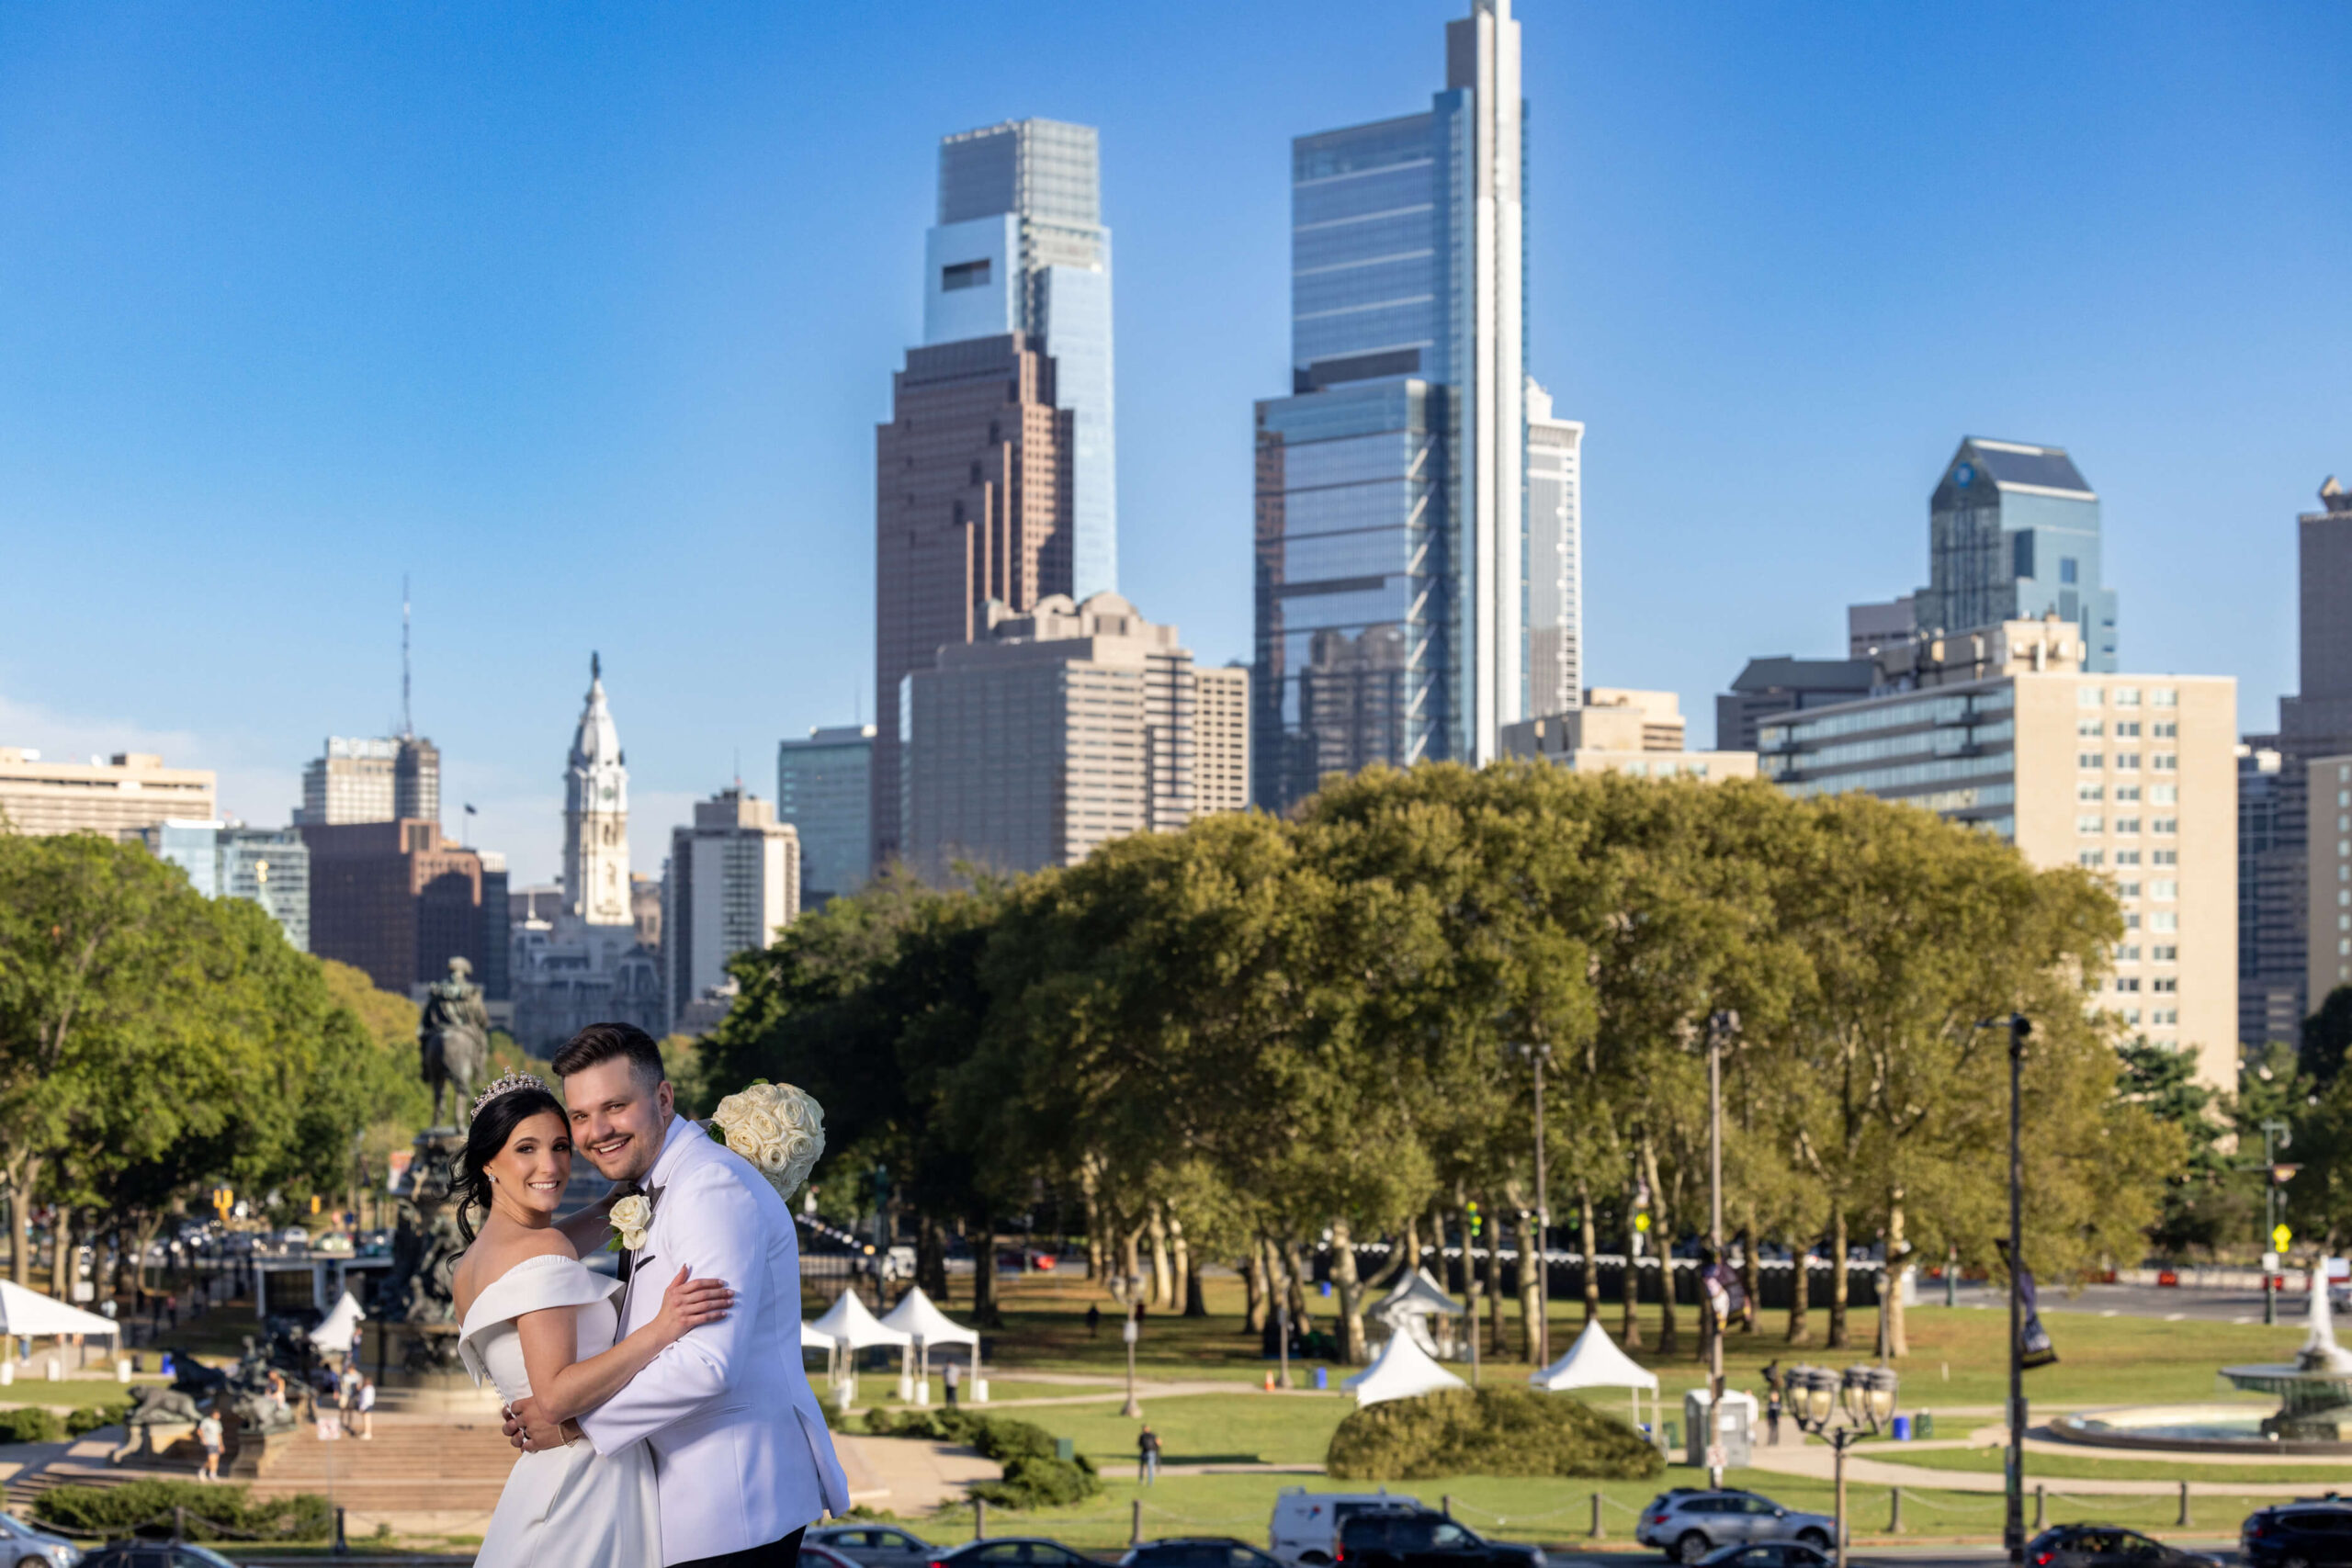 bride and groom posing at art museum with philly skyline behind them on sunny day